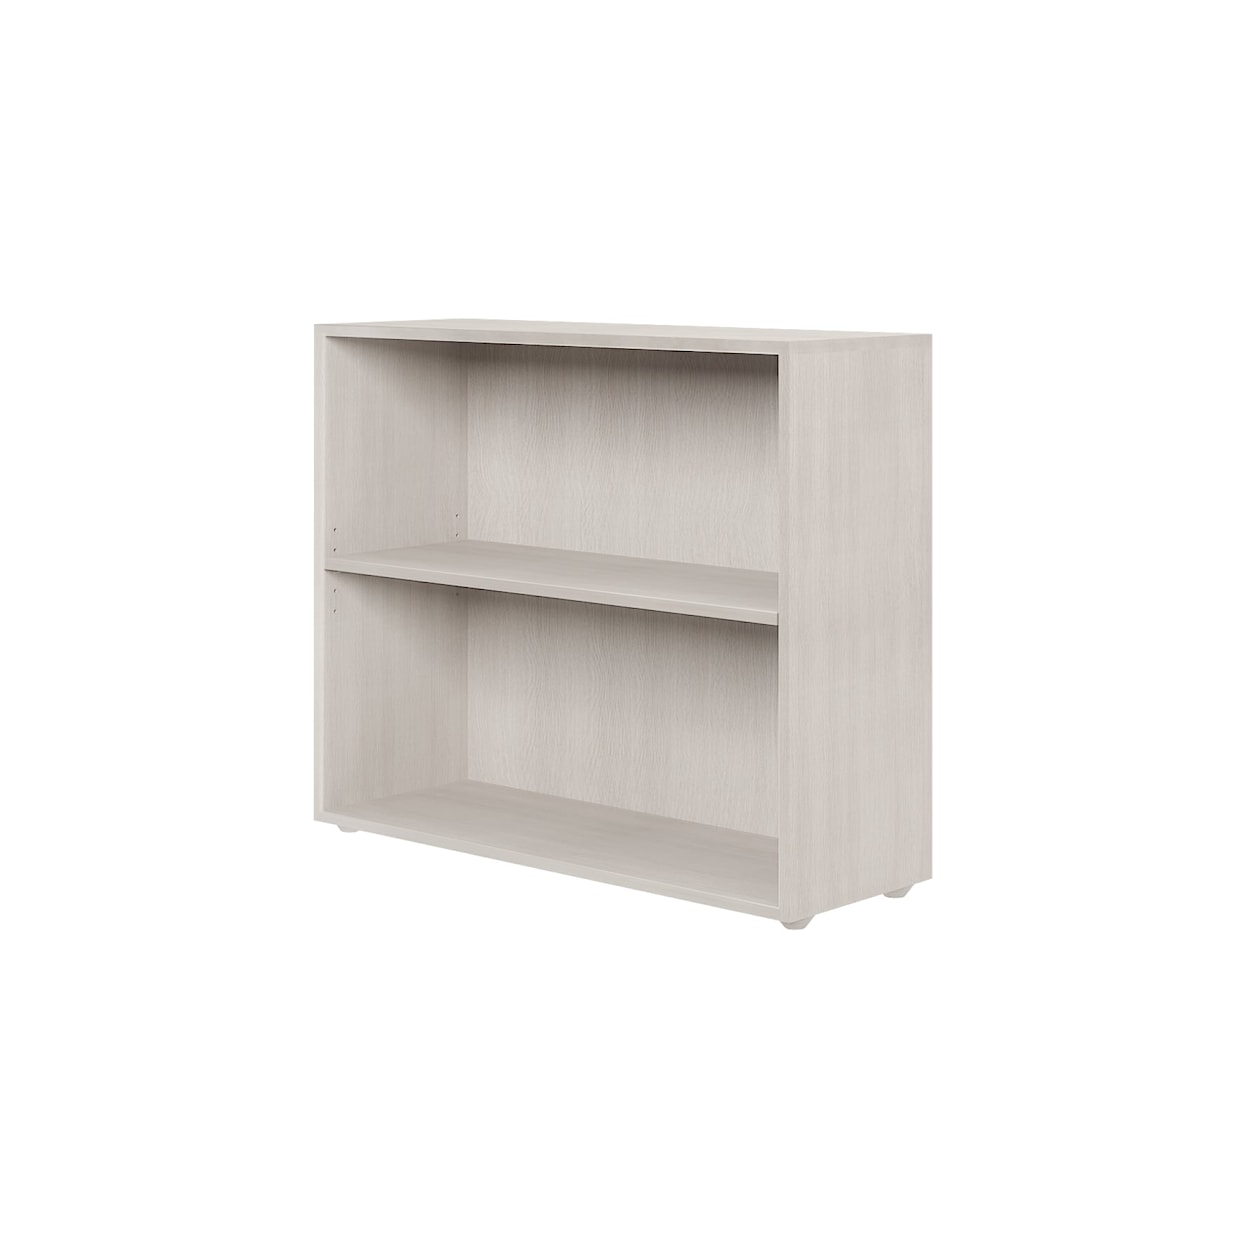 Jackpot Kids Storage Solutions Youth 2 Shelf Bookcase in Stone